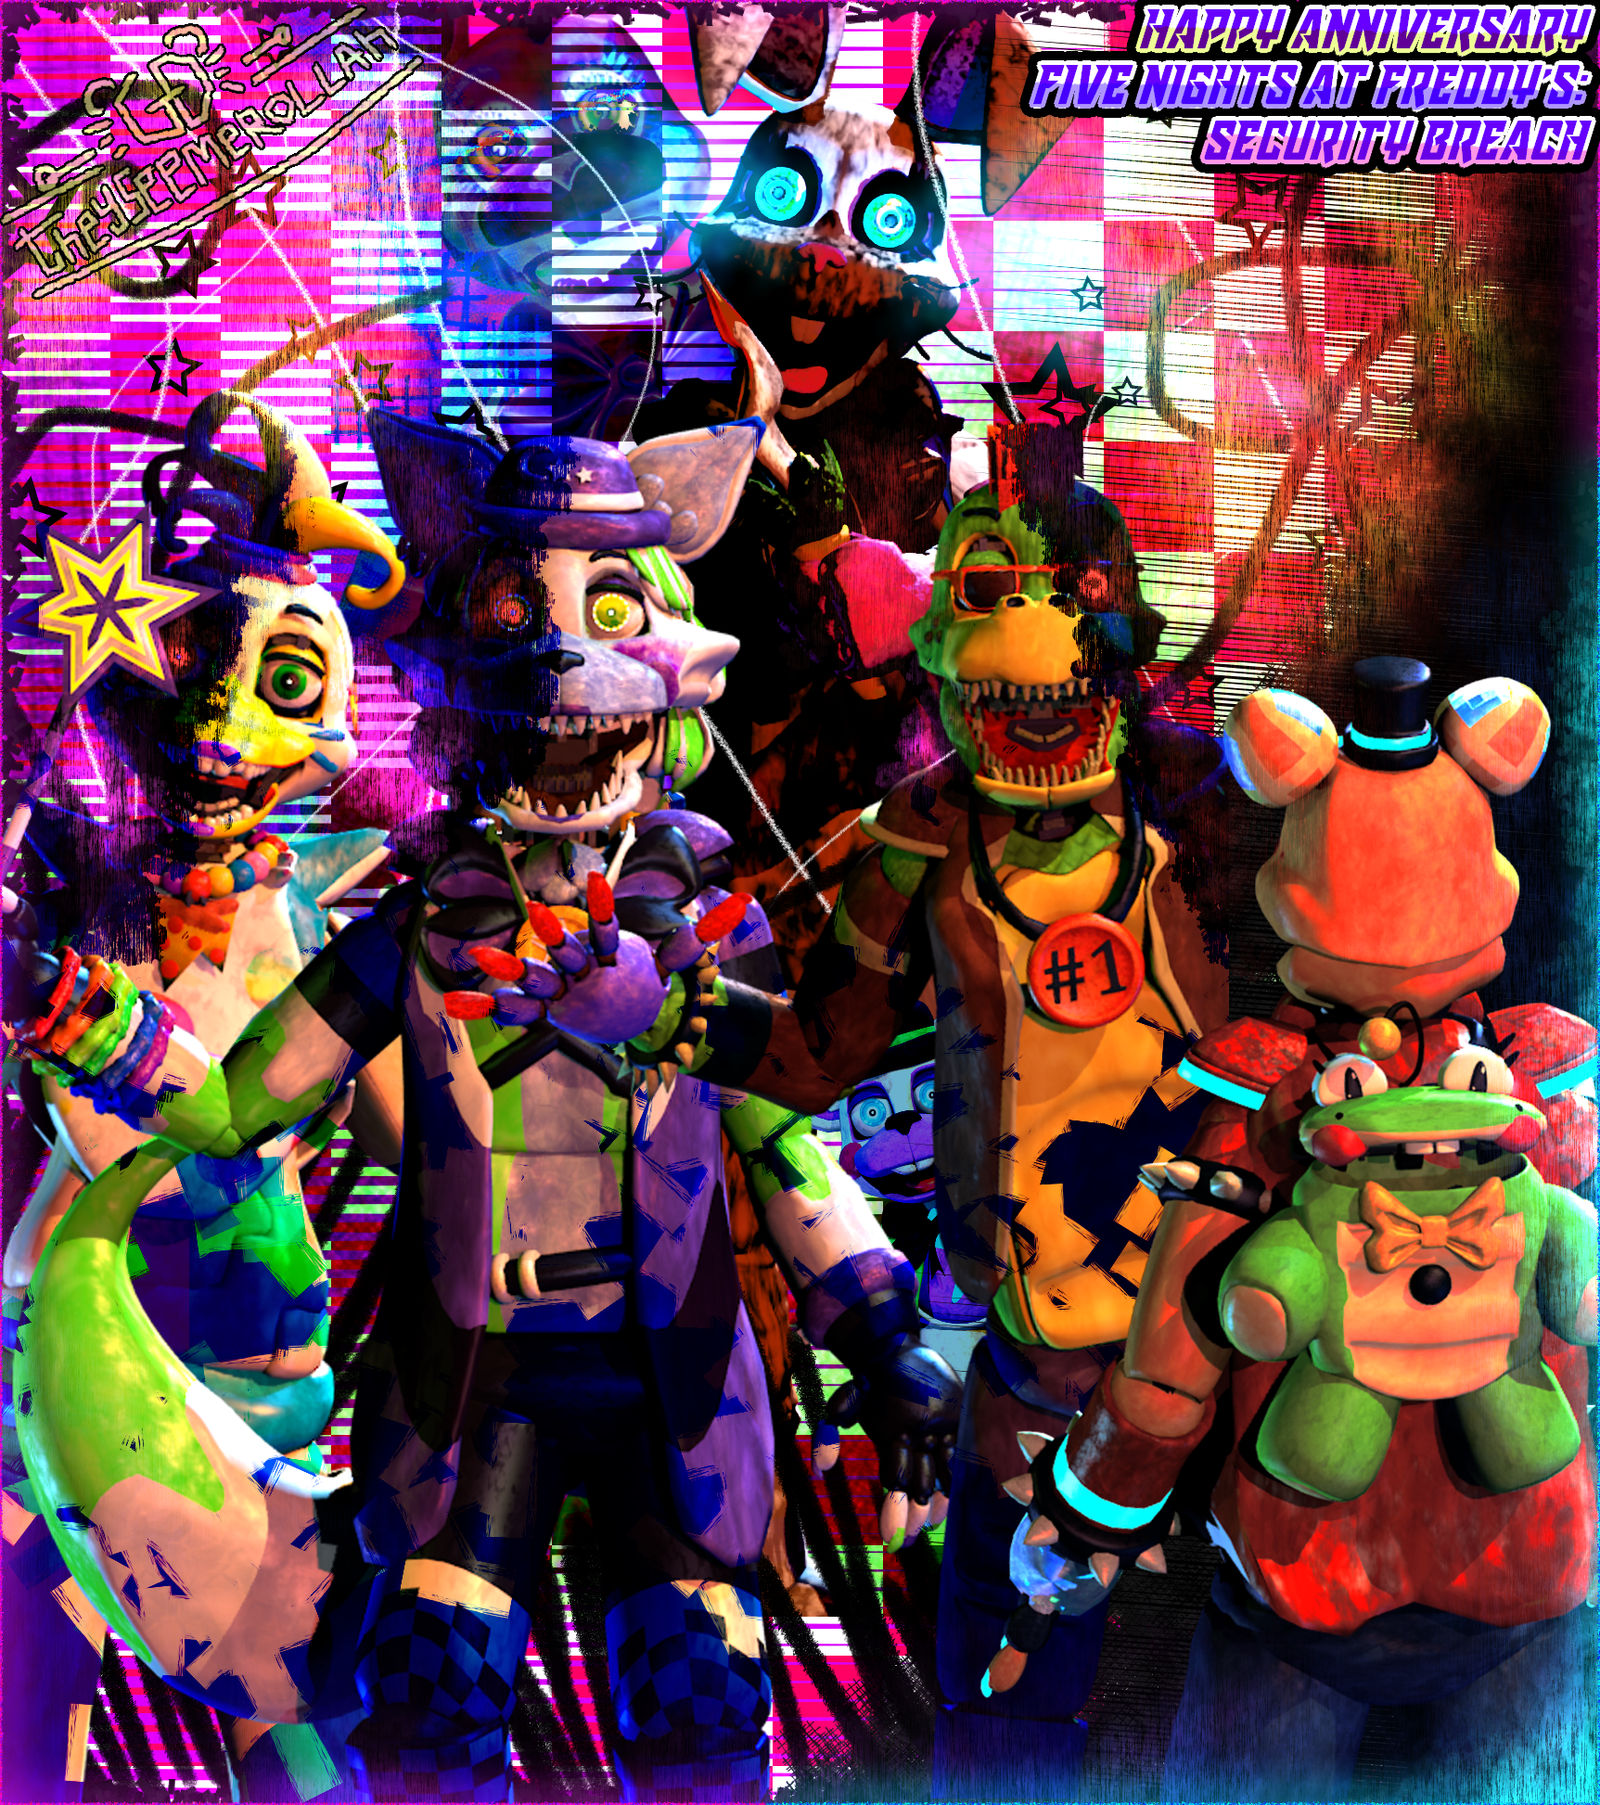 happy anniversary fnaf!! to celebrate, here's a look at stylized